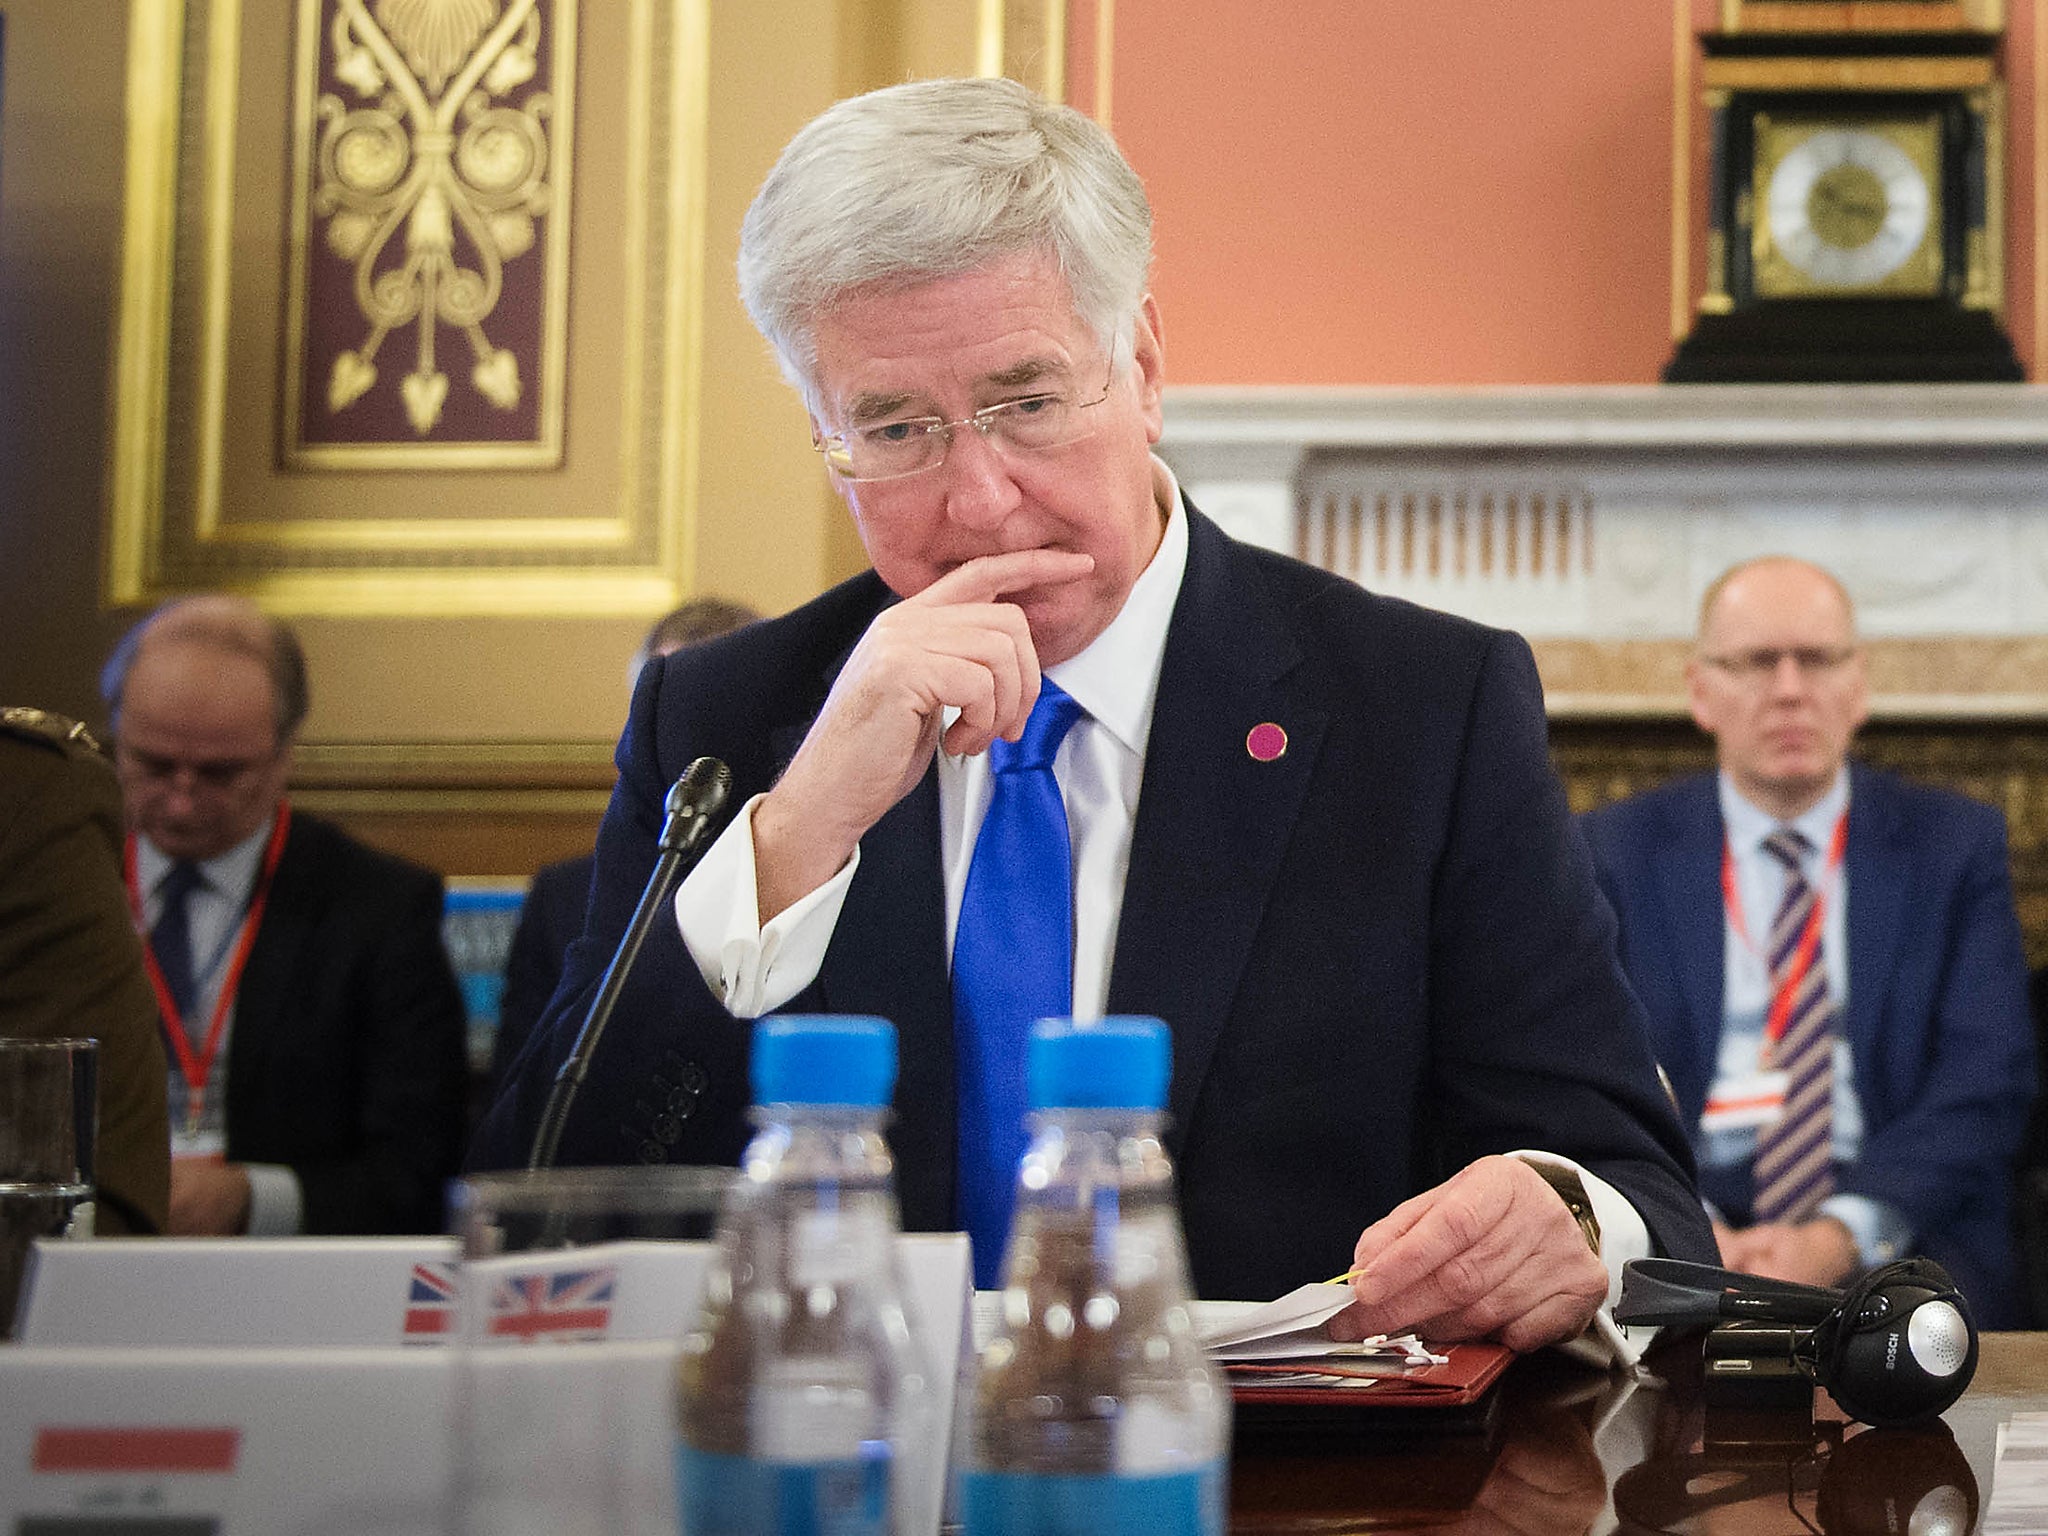 Defence Secretary Sir Michael Fallon refused to comment on leaks over security from inside Cabinet meetings about security arrangements after Brexit